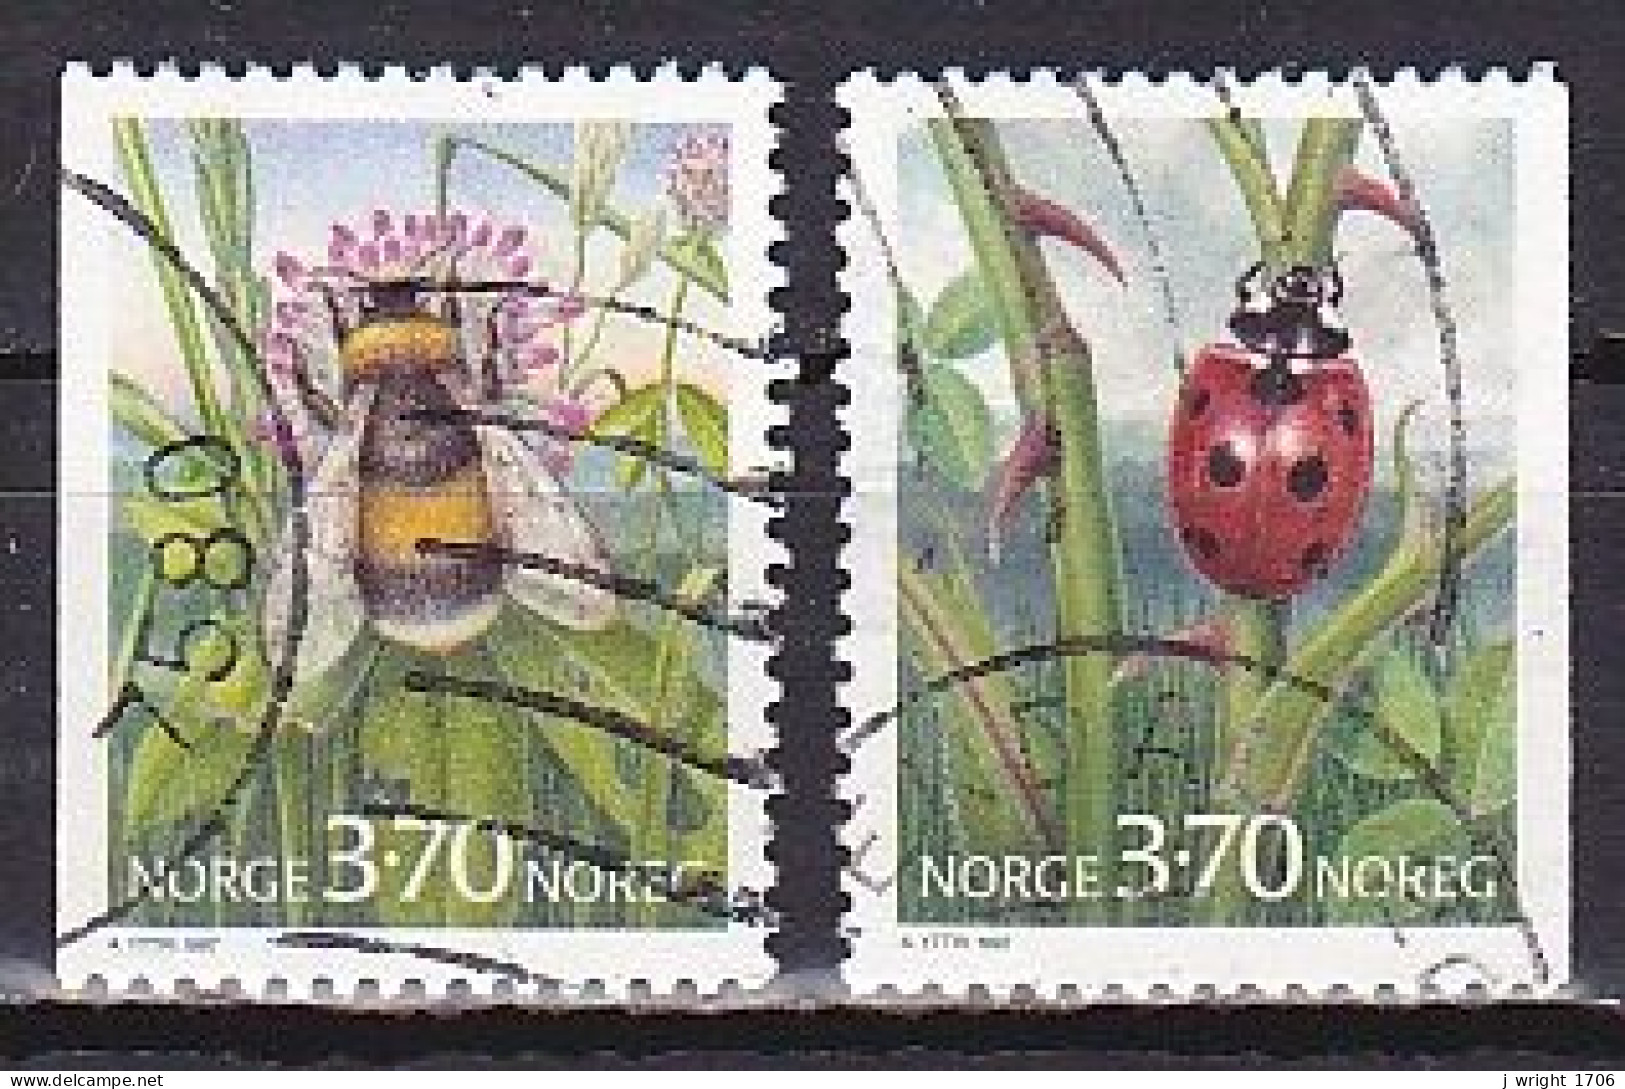 Norway, 1997, Insects, Set, USED - Gebraucht